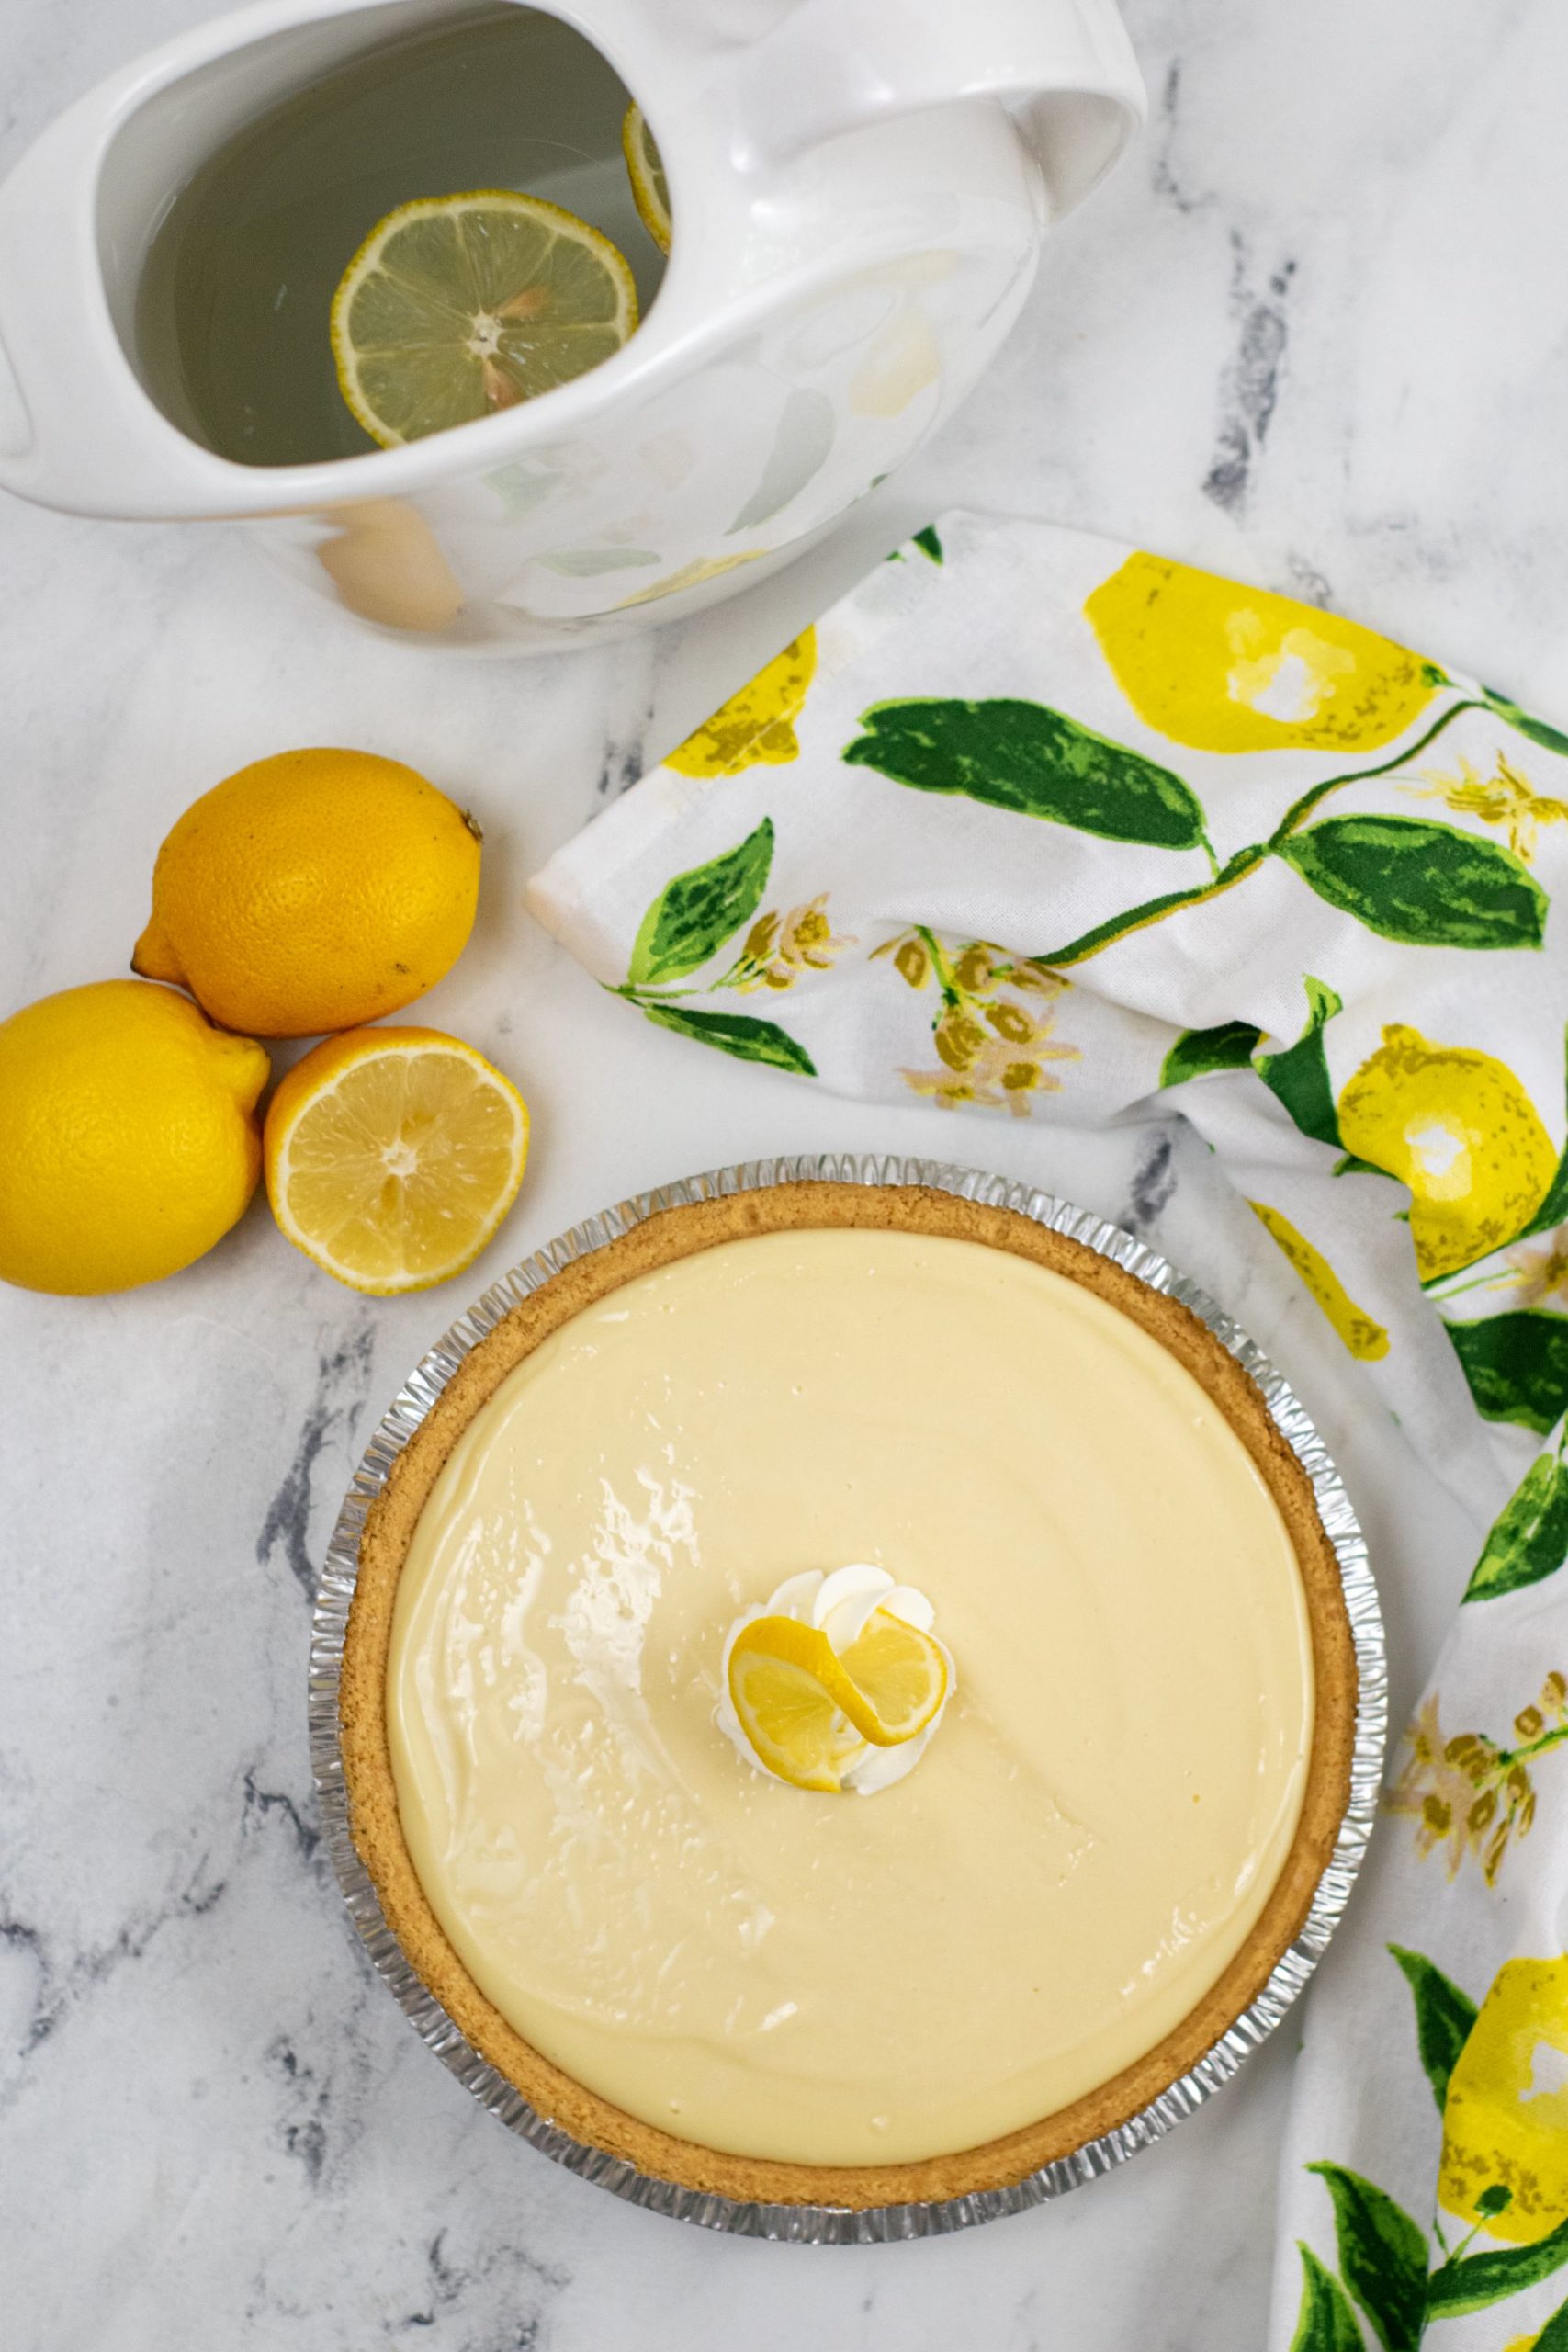 A whole pie uncut with lemons on the side.